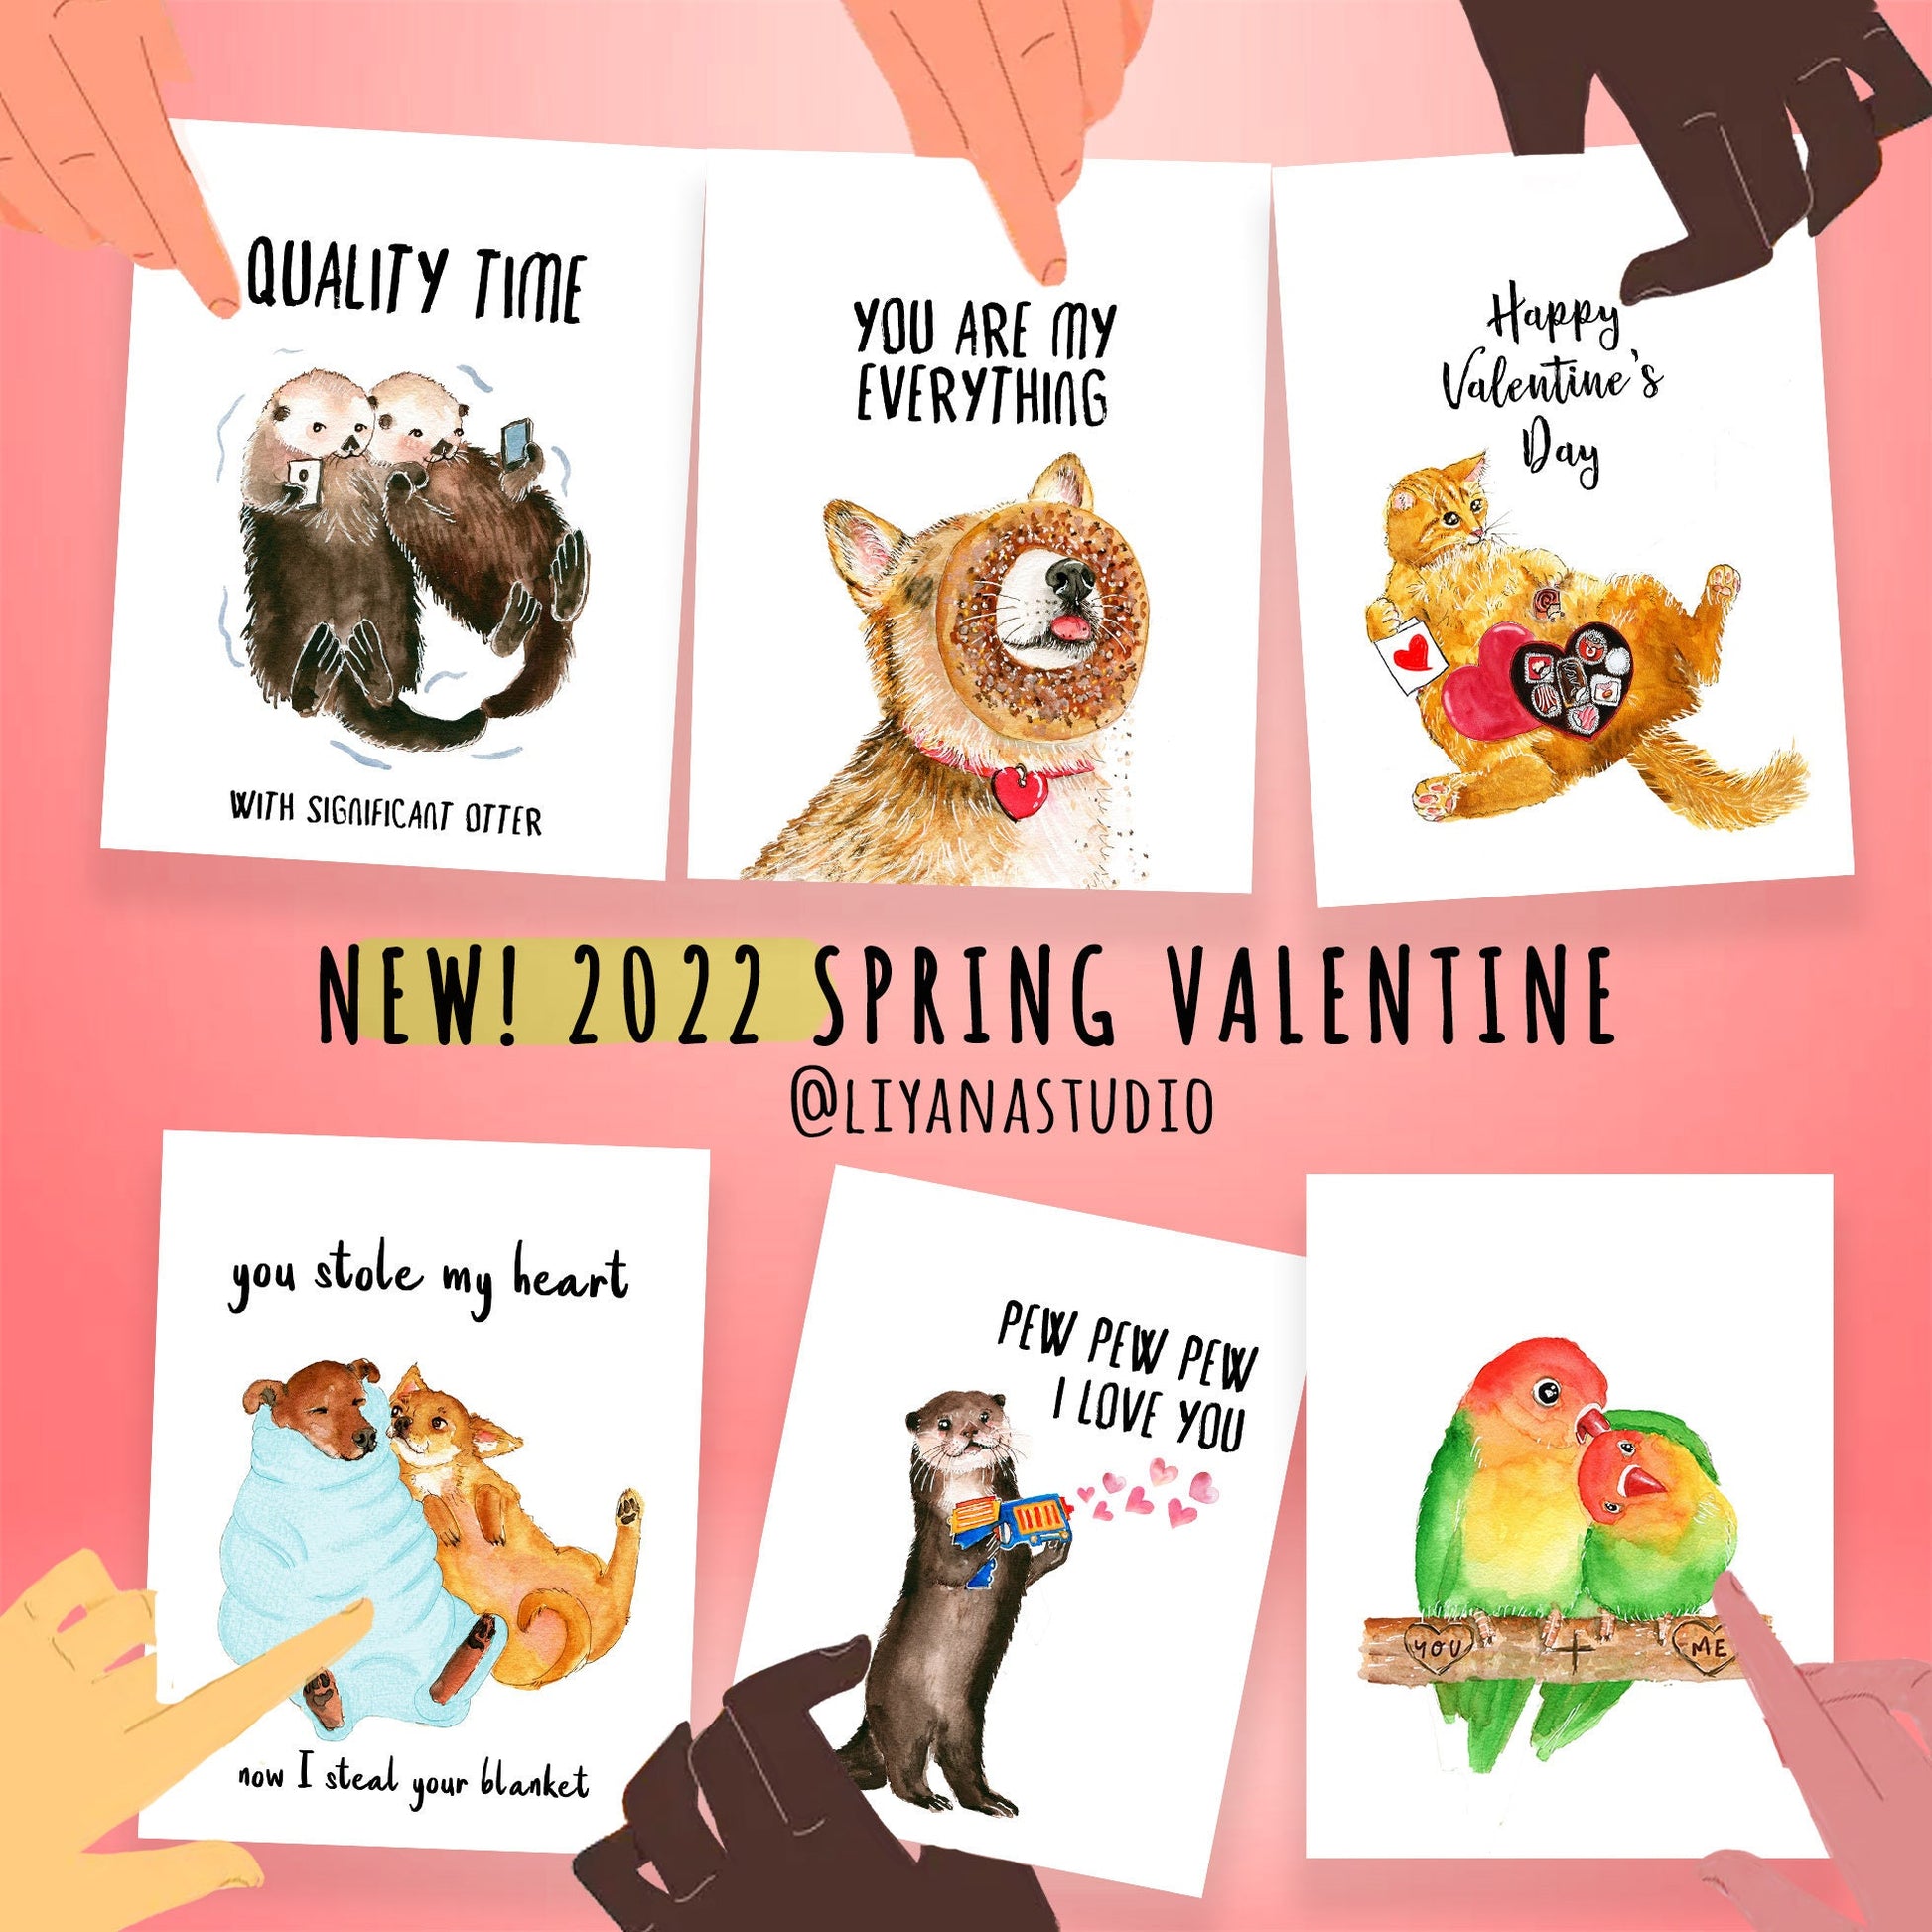 Netflix And Chill Cat Valentines Card For Boyfriend - I Love Doing Nothing With You